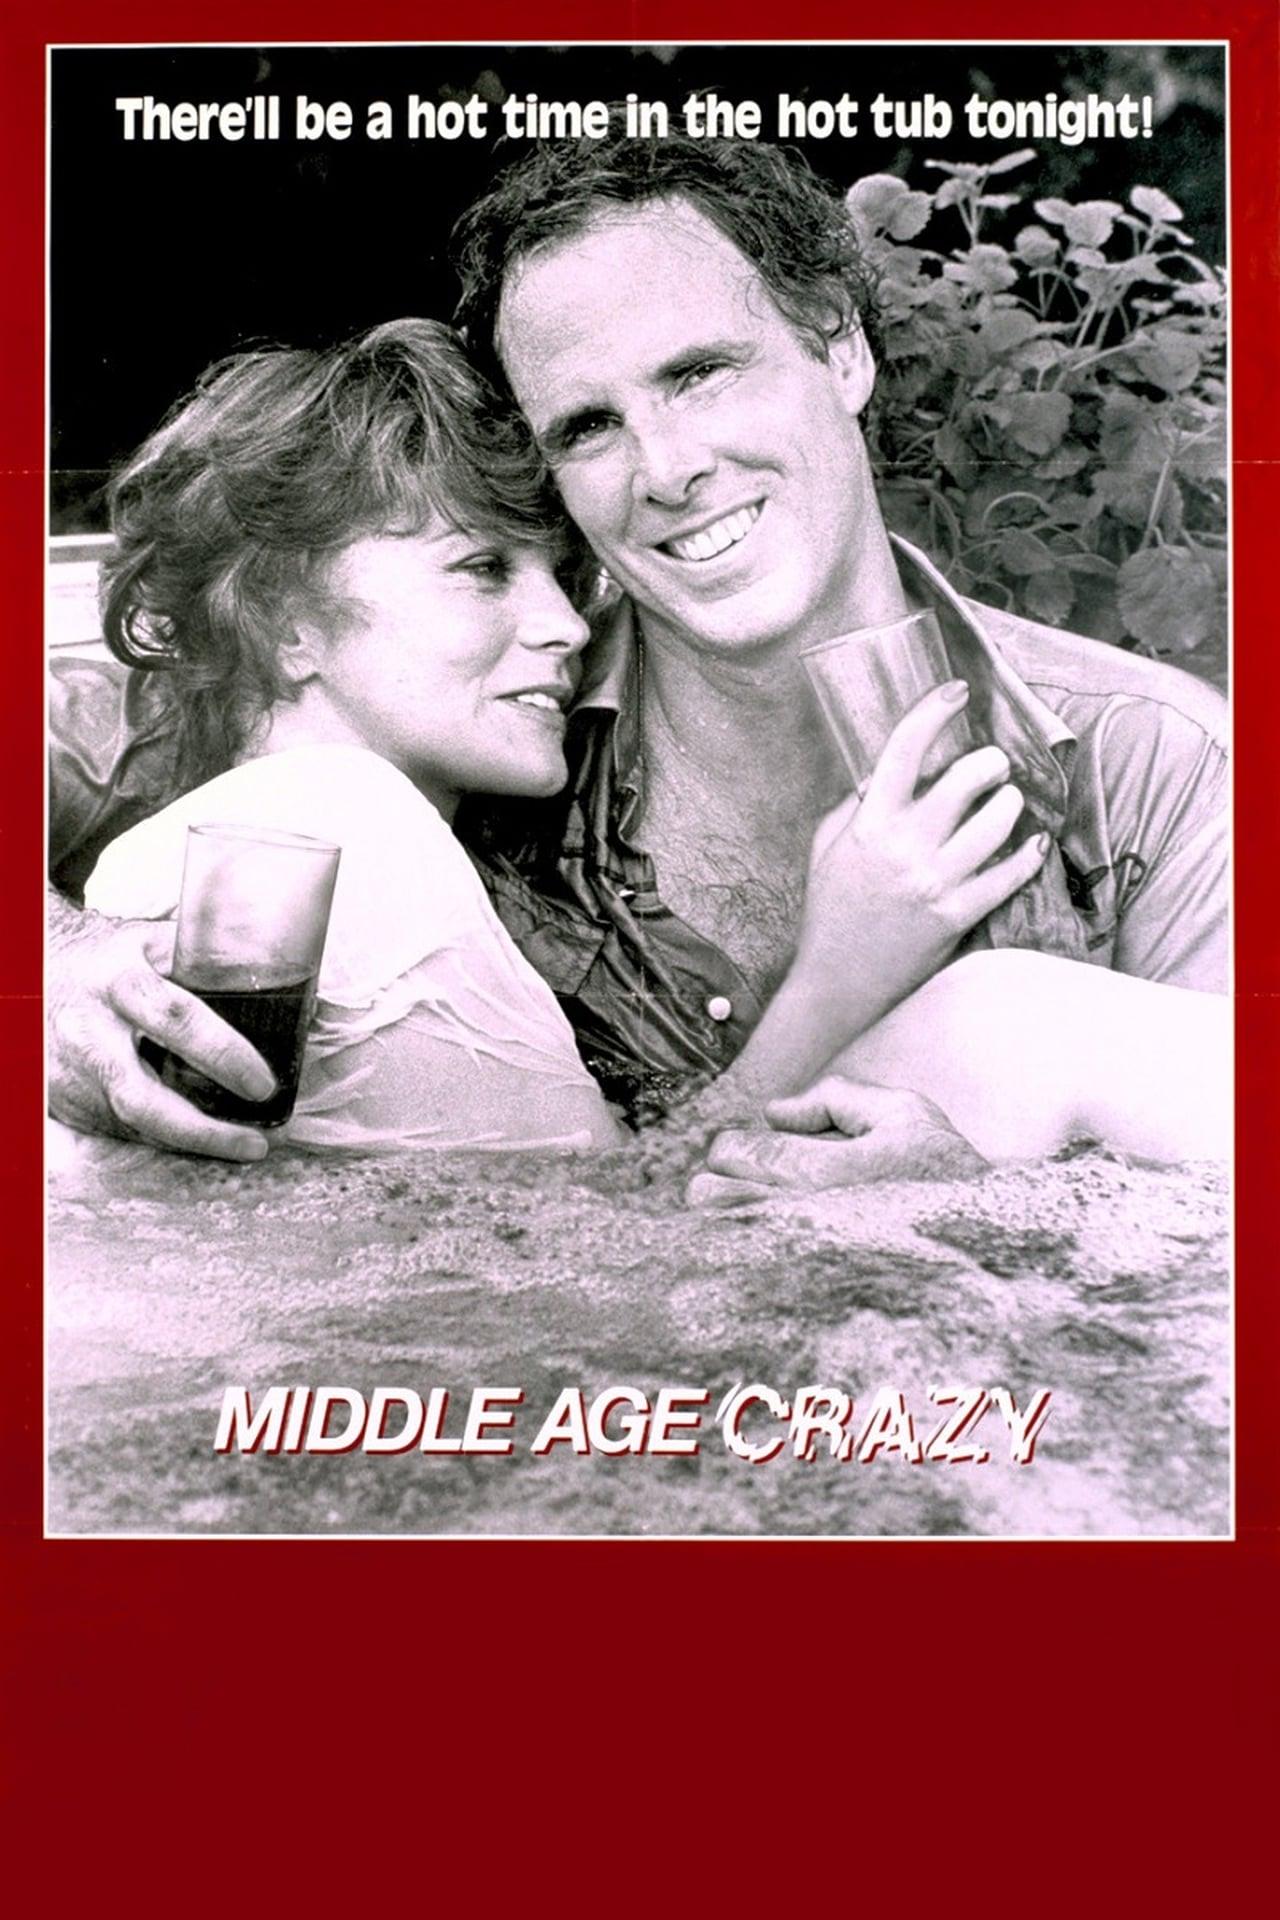 Middle Age Crazy poster